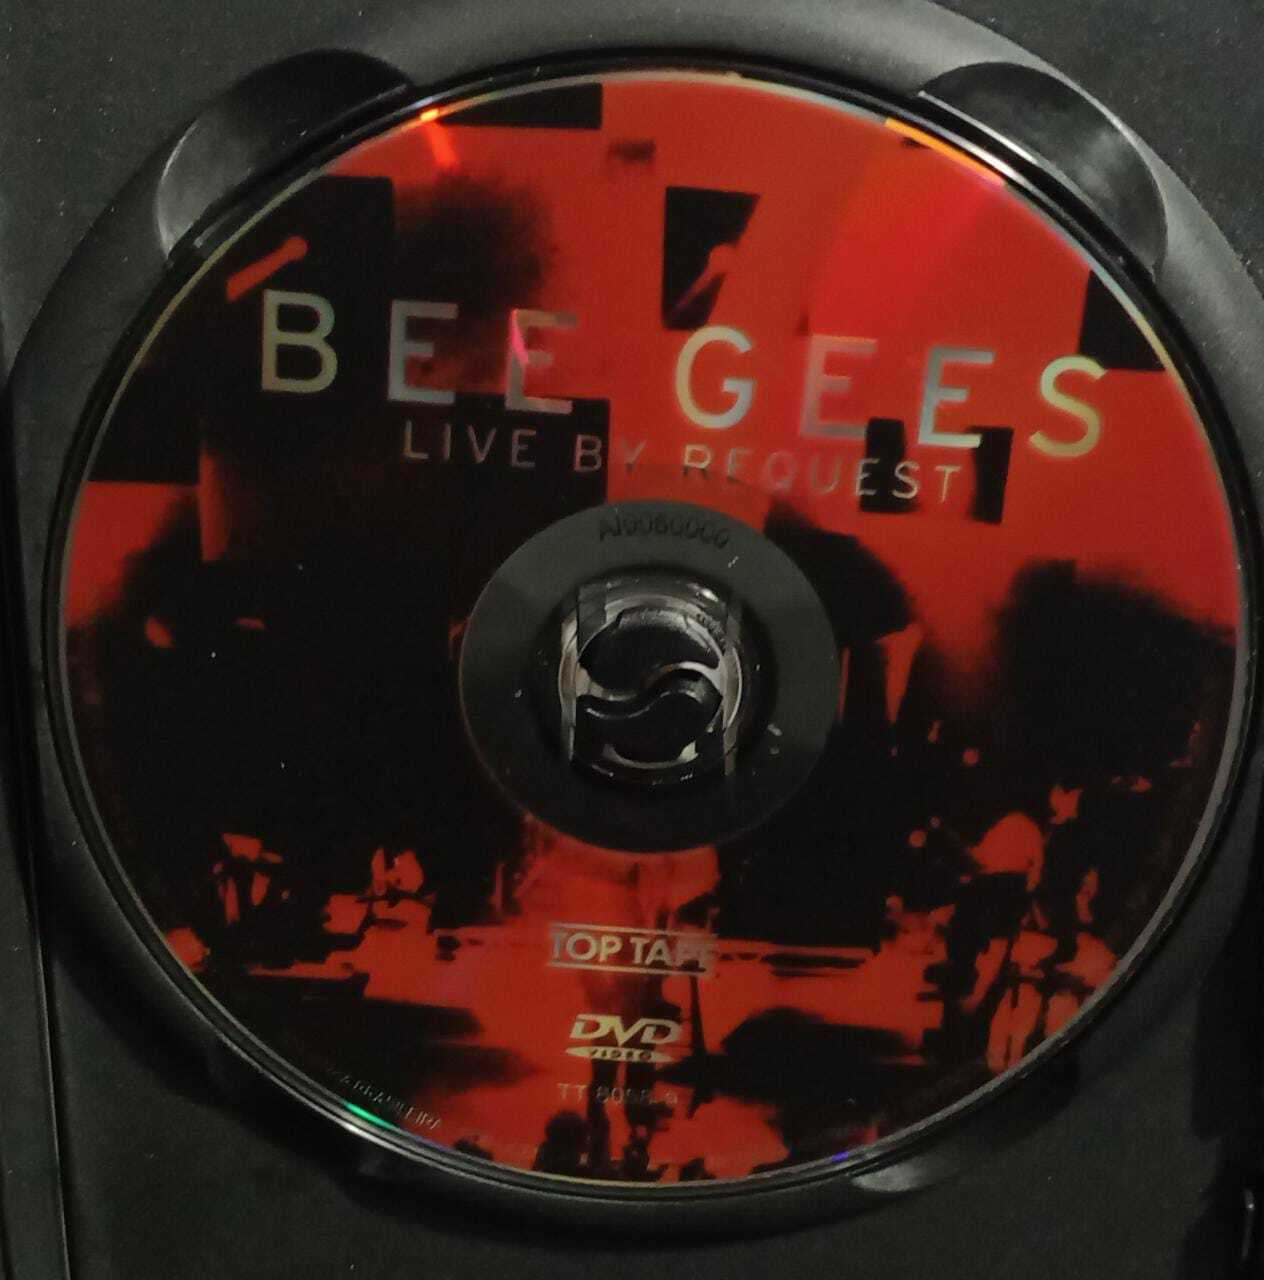 DVD - Bee Gees - Live By Request